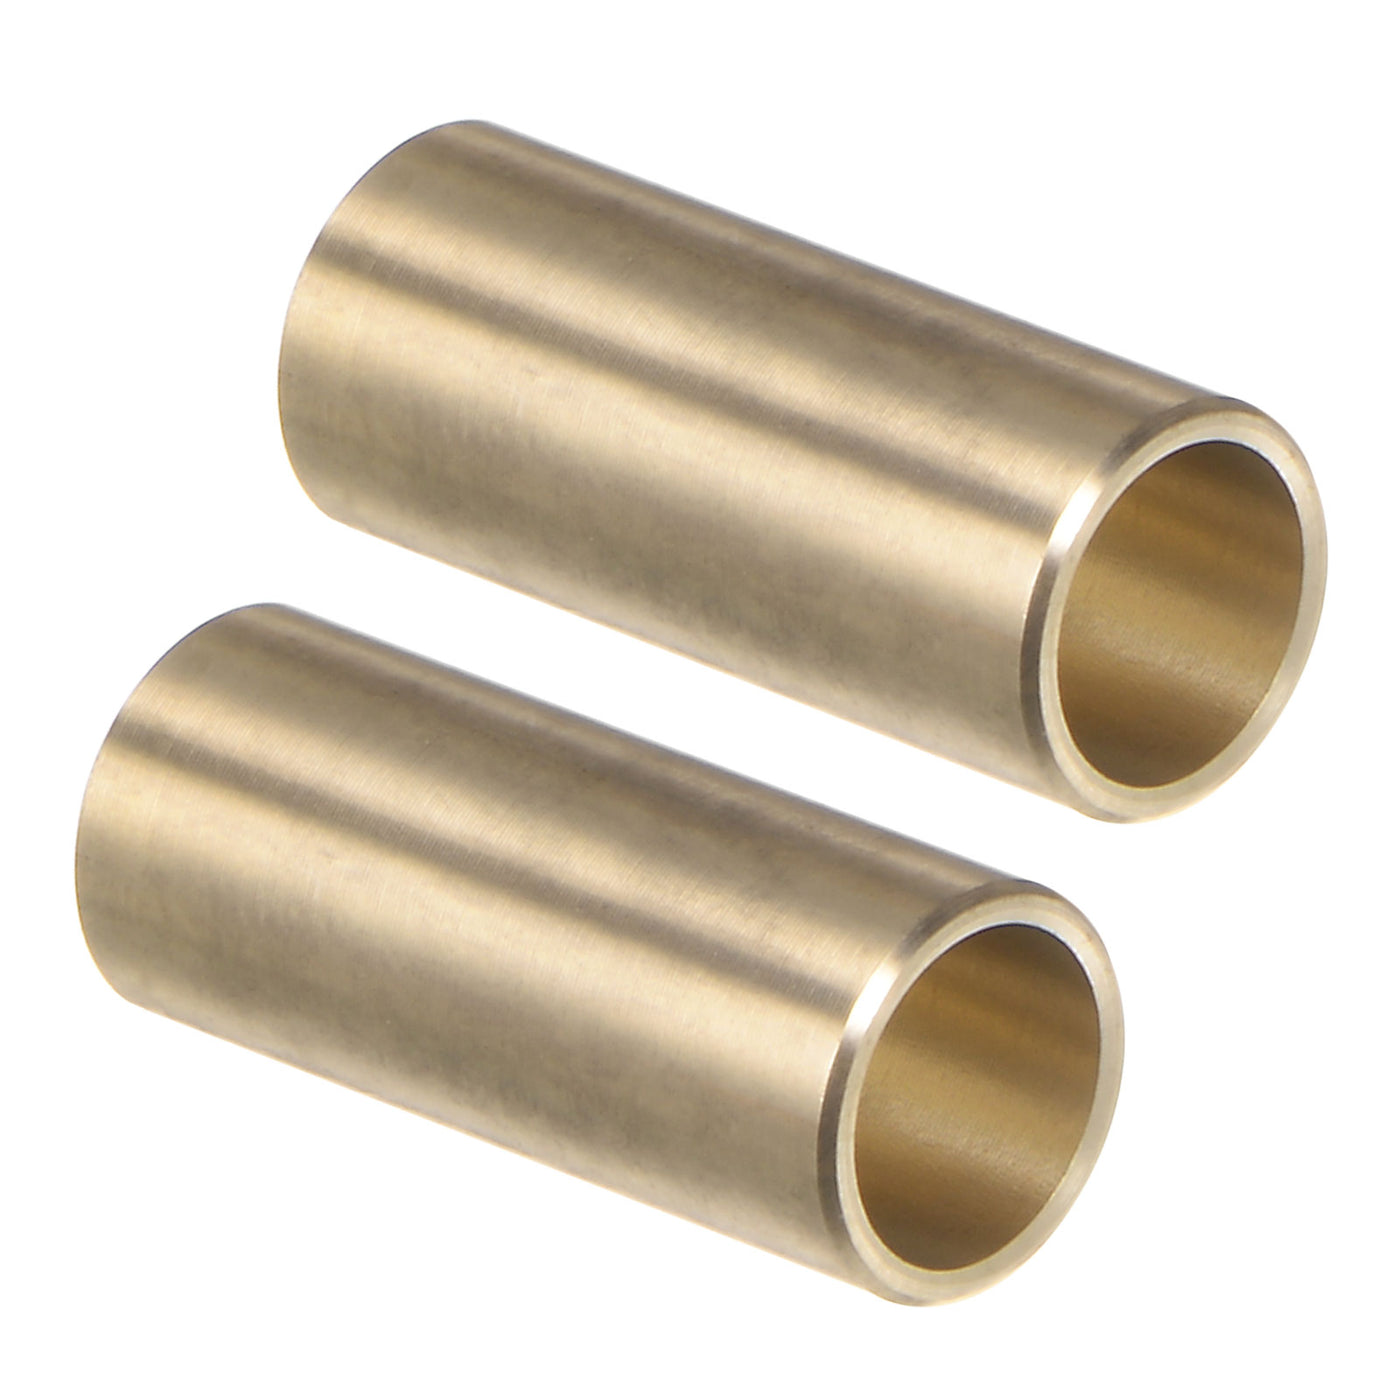 uxcell Uxcell 2pcs Sleeve Bearings 1/4" x 5/16" x 3/4" Wrapped Oilless Bushings Cast Brass